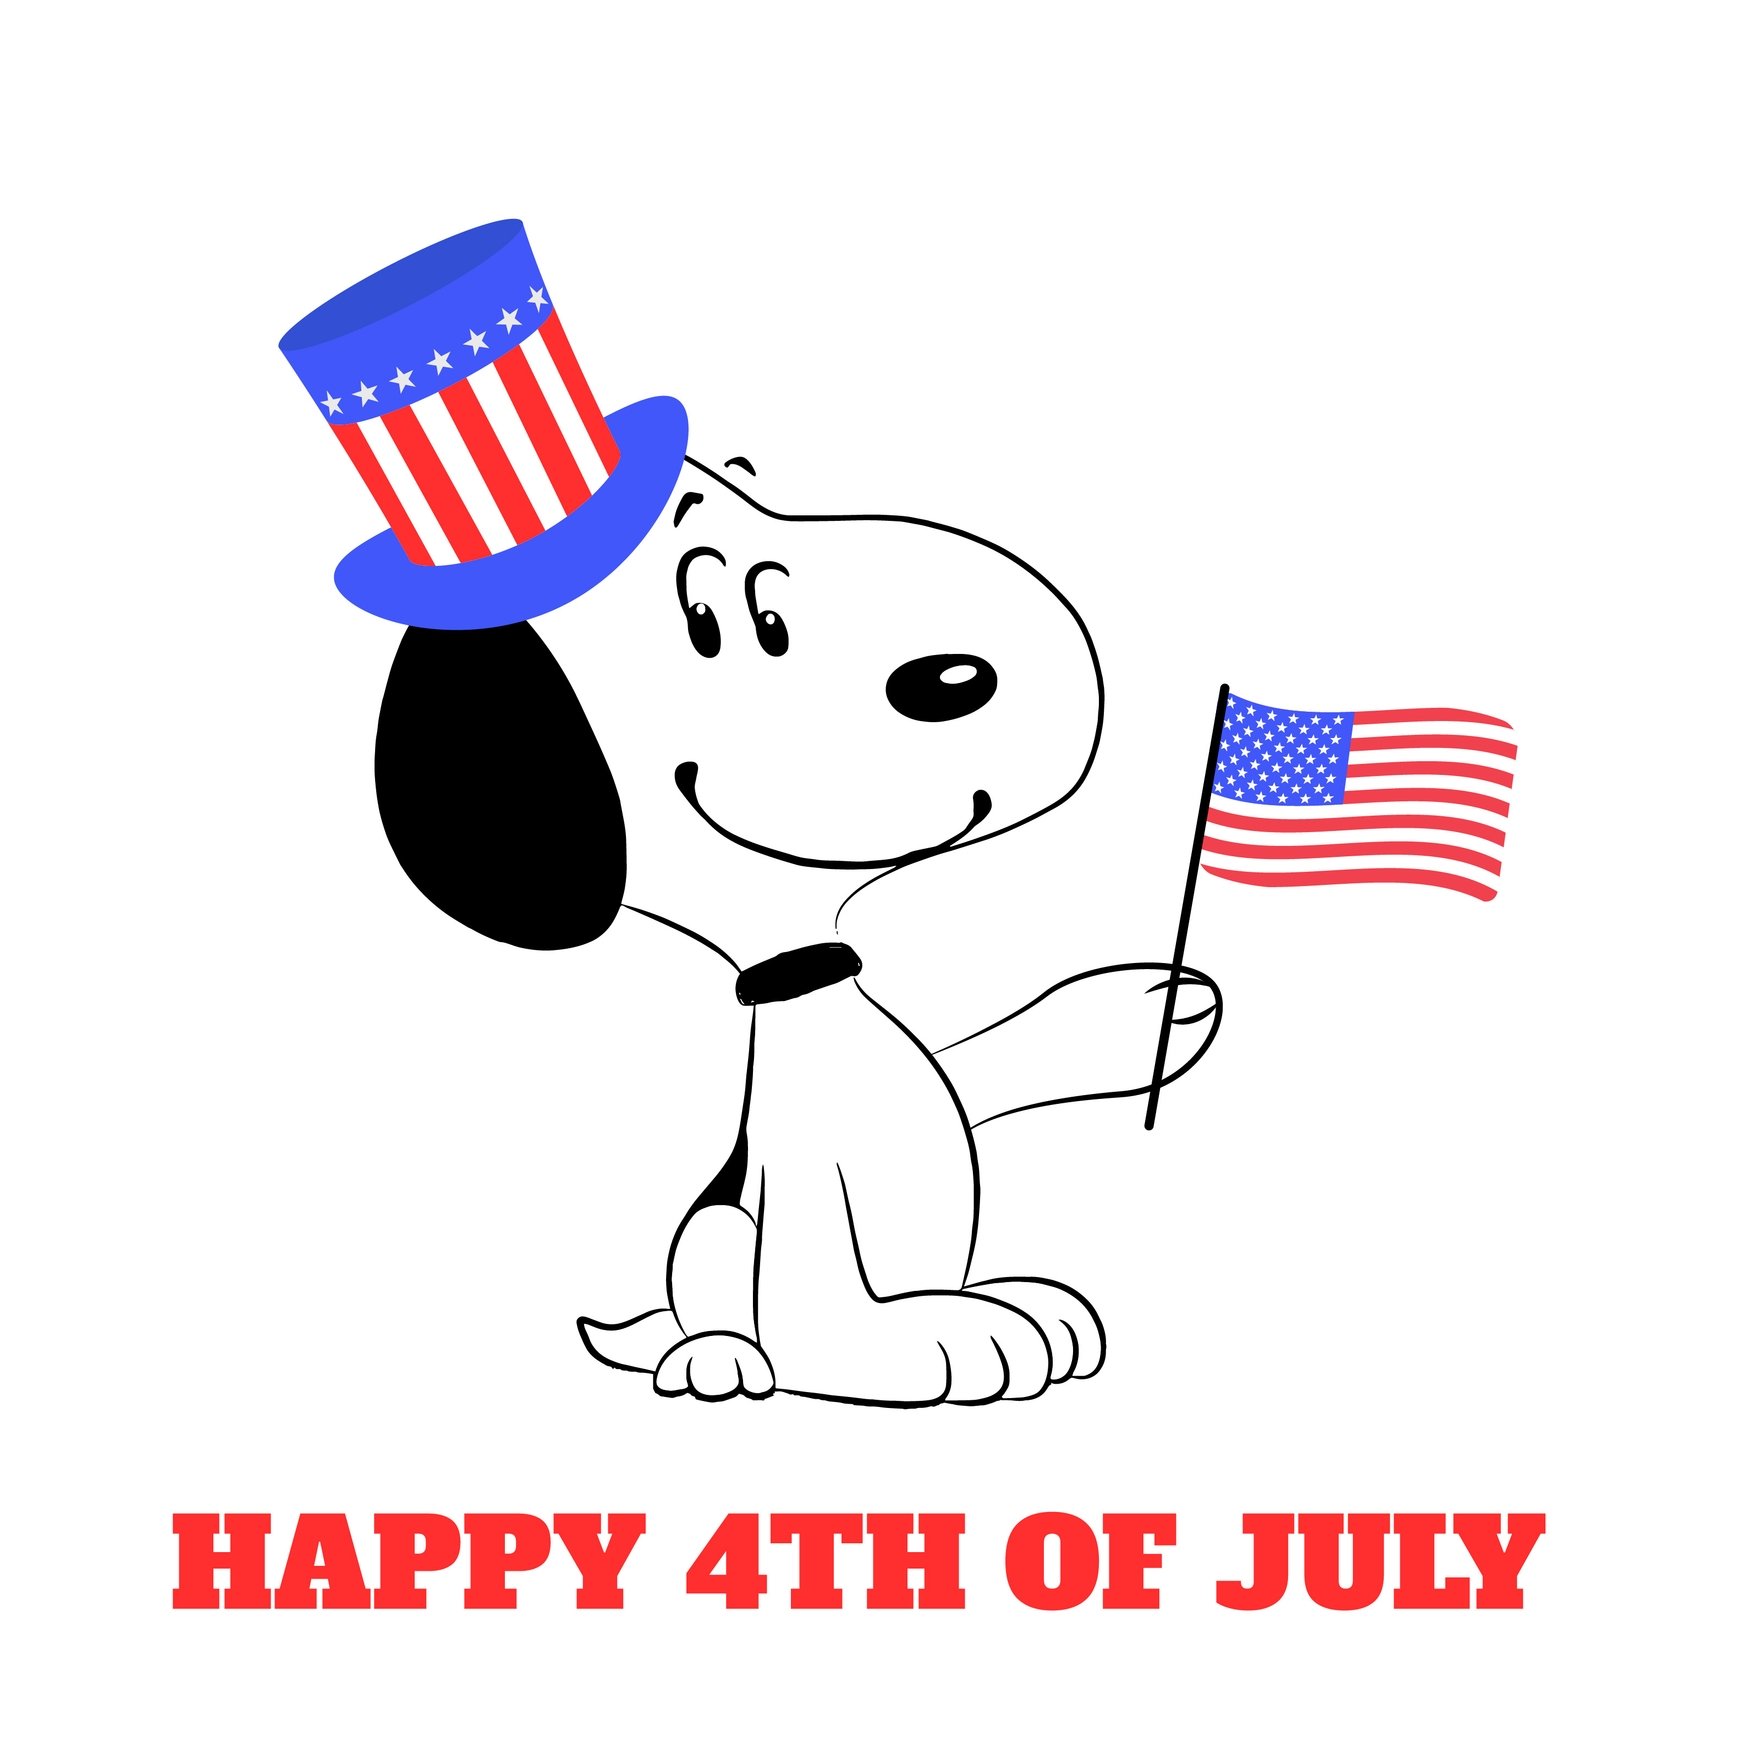 Free Snoopy 4th Of July Gif in Illustrator, EPS, SVG, JPG, GIF, PNG, After Effects